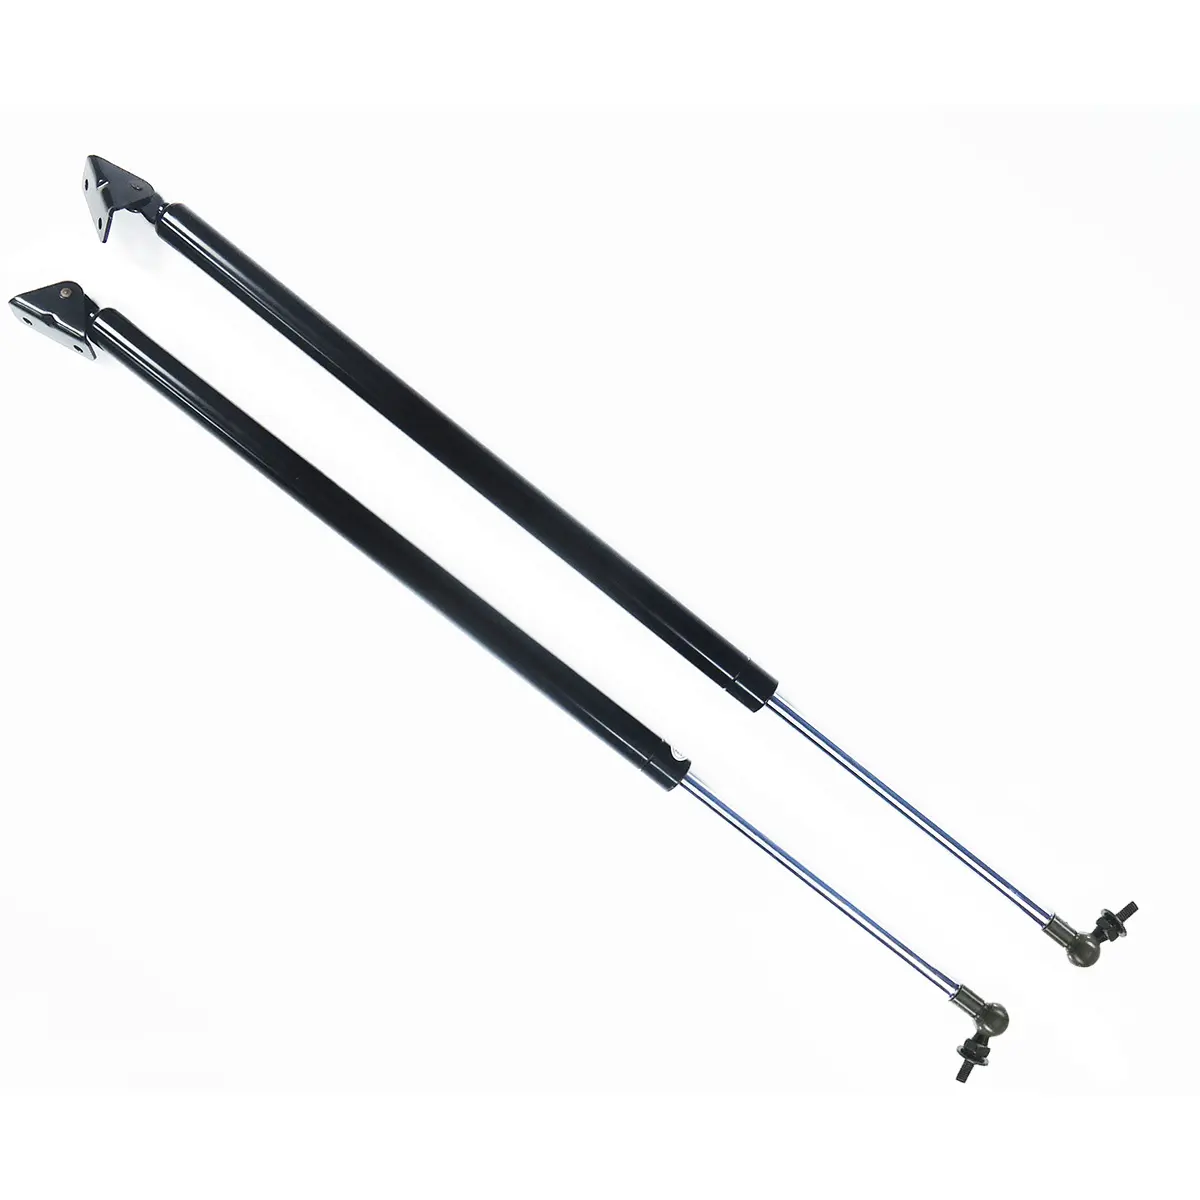 Custom Mitsubishi delica PE car hood and trunk hydraulic carbon steel piston type gas spring arm lifts for auto parts gas sturts